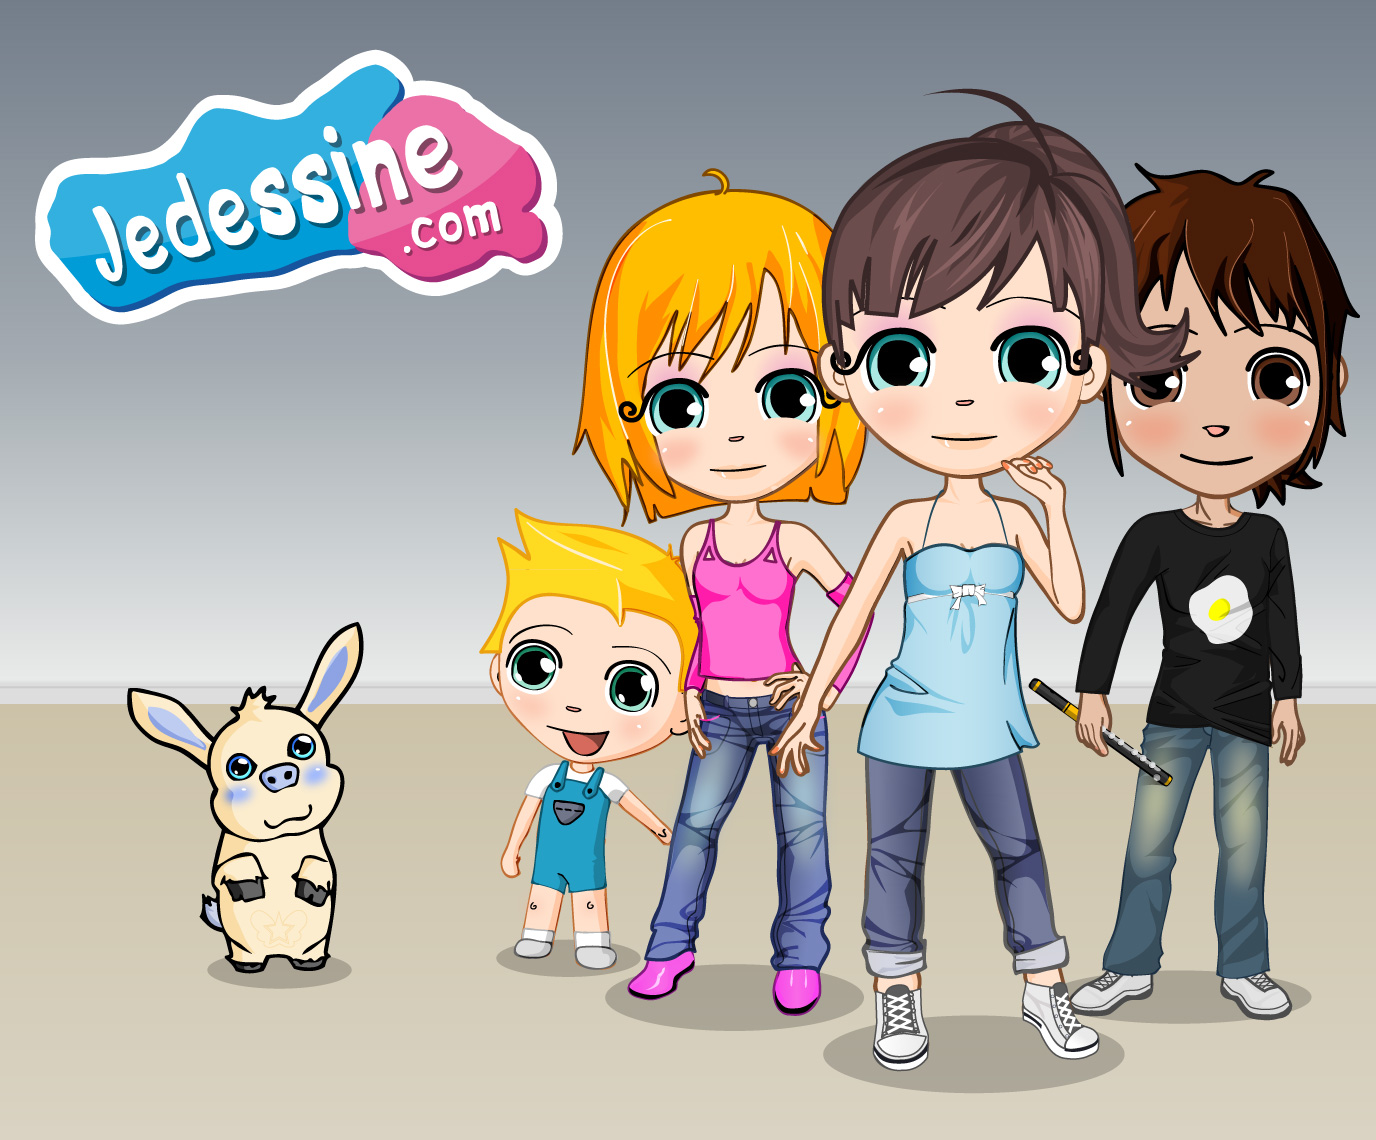 all main character of jedessine.com